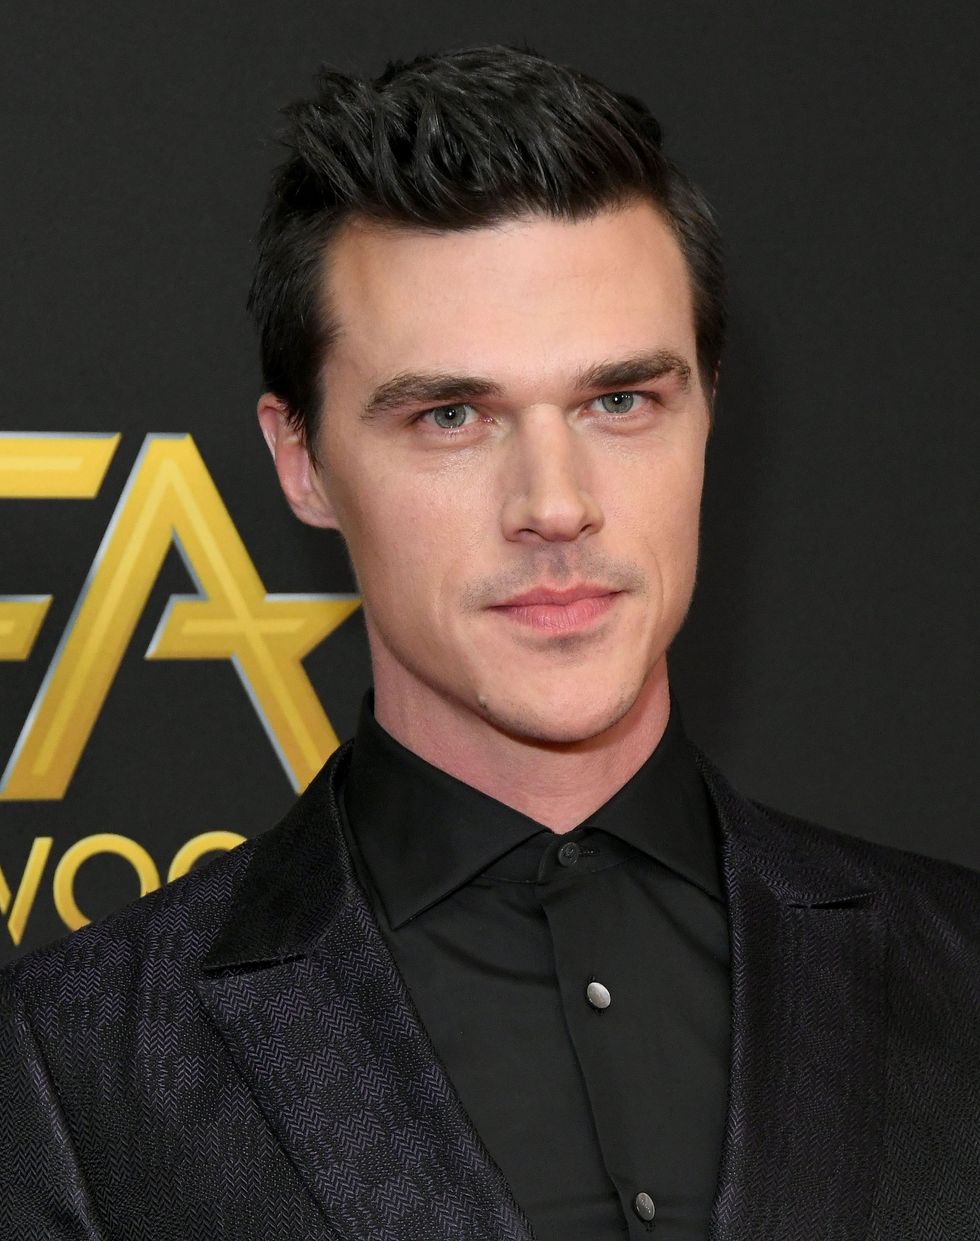 Finn Wittrock and Christopher Lloyd to be fellows of infinite jest